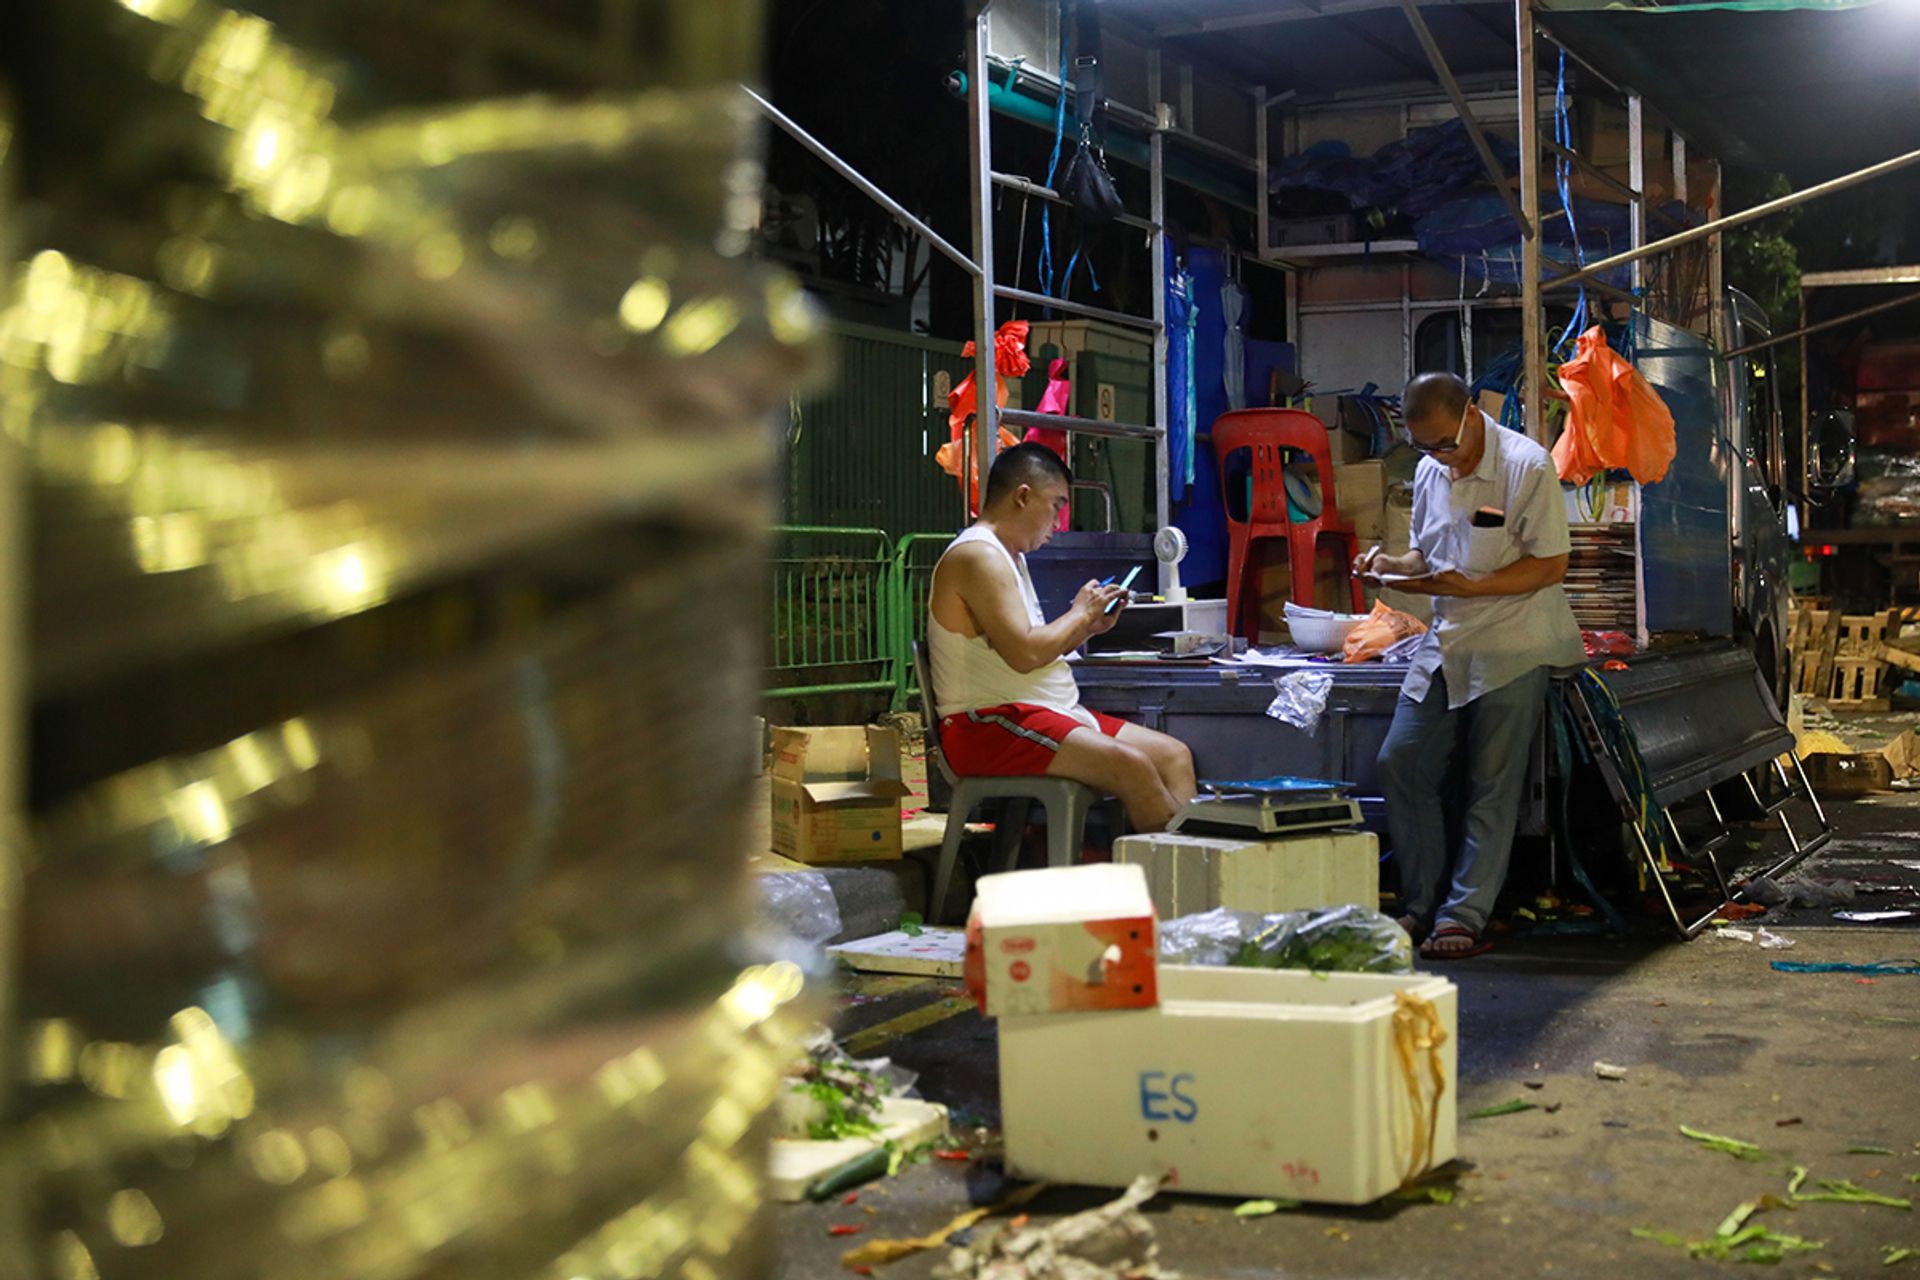 After a busy night, second-generation stall owner Ong Chai Meng (left), 52, and Mr Chan tally their records in the wee hours of May 6. Mr Ong first began helping out at his father’s stall during the primary school holidays more than four decades ago.